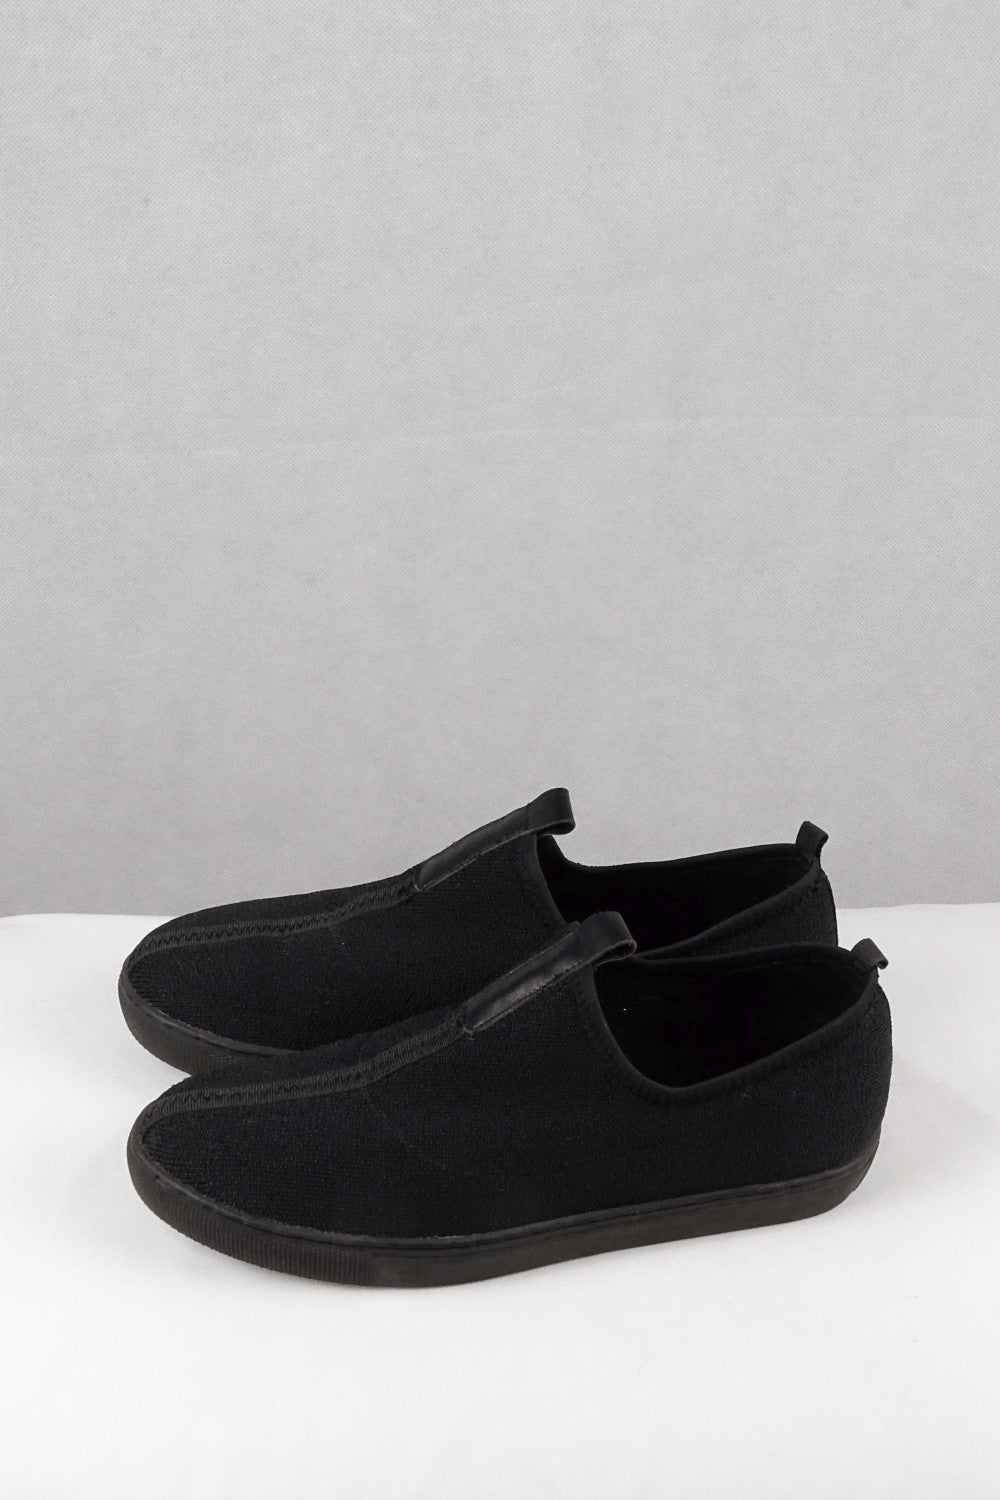 Lady Rose Black Loafers 8